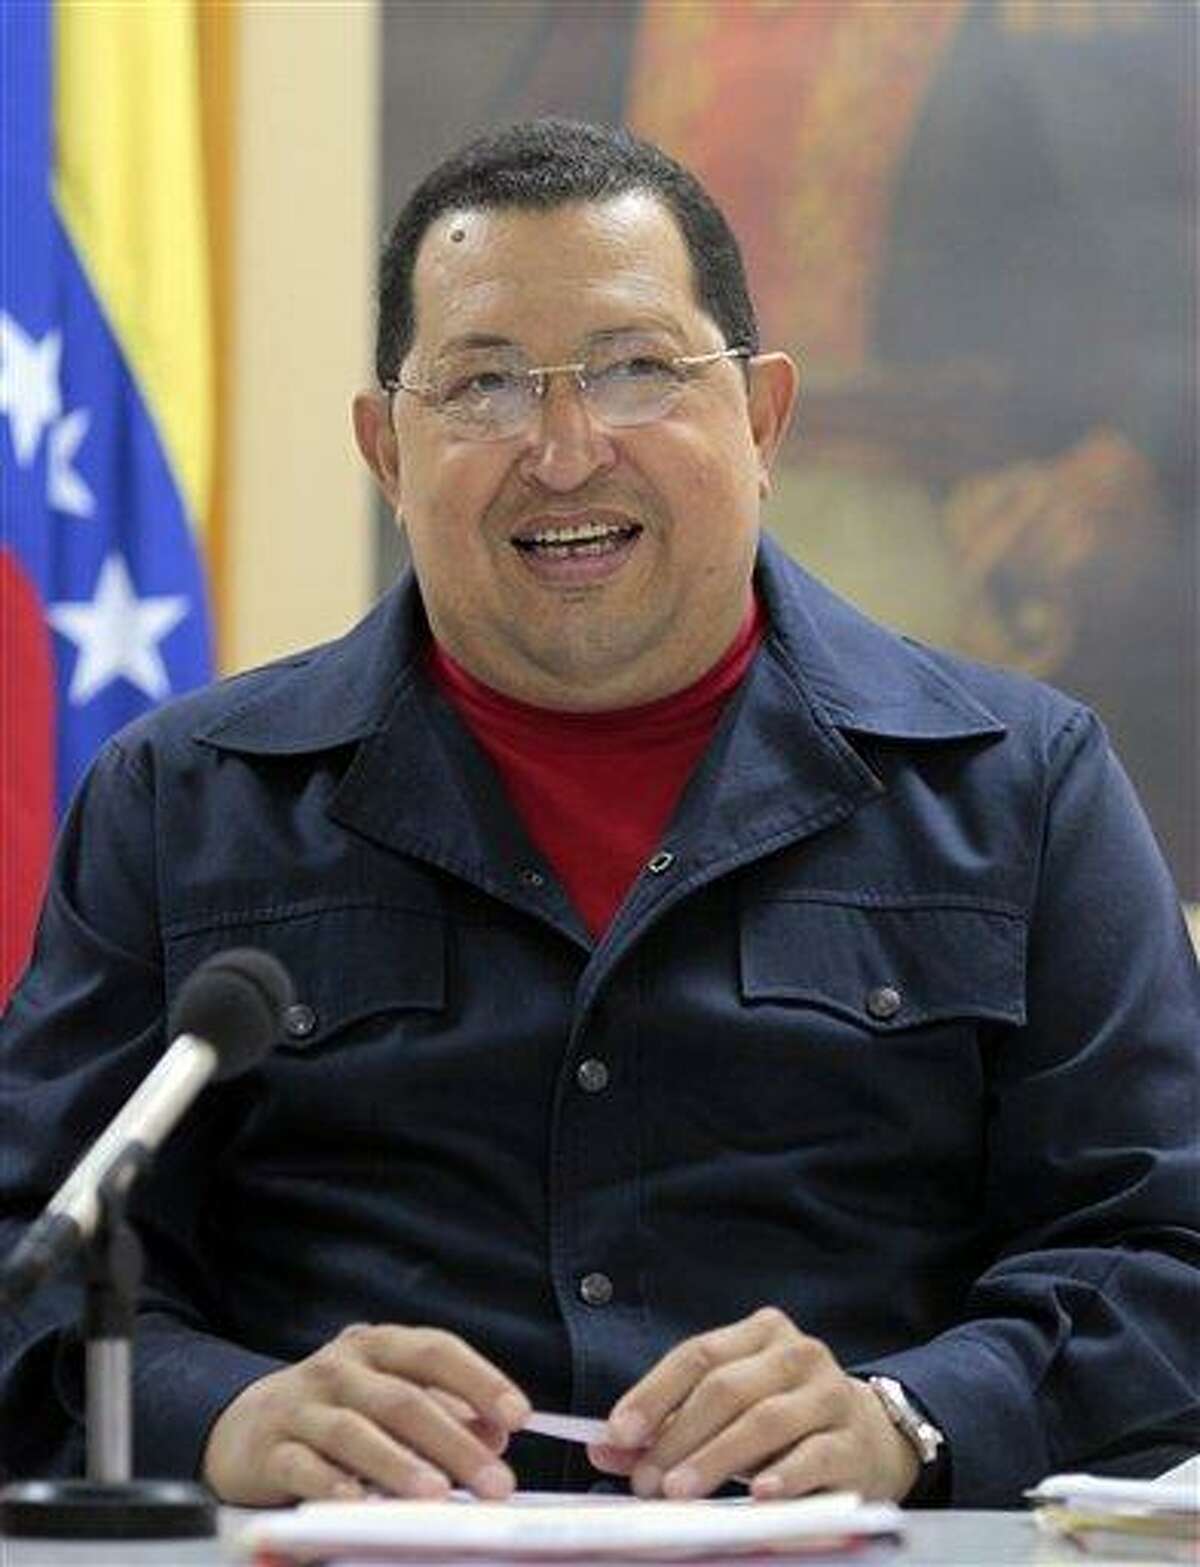 In this photo released by Miraflores Press Office Sunday, Venezuela's President Hugo Chavez speaks during a televised speech at an undisclosed location in Havana, Cuba, Saturday. Chavez appeared Sunday on television for the first time in nine days during which he underwent surgery in Cuba to remove a tumor. Chavez spoke firmly in footage recorded Saturday in Havana. Associated Press